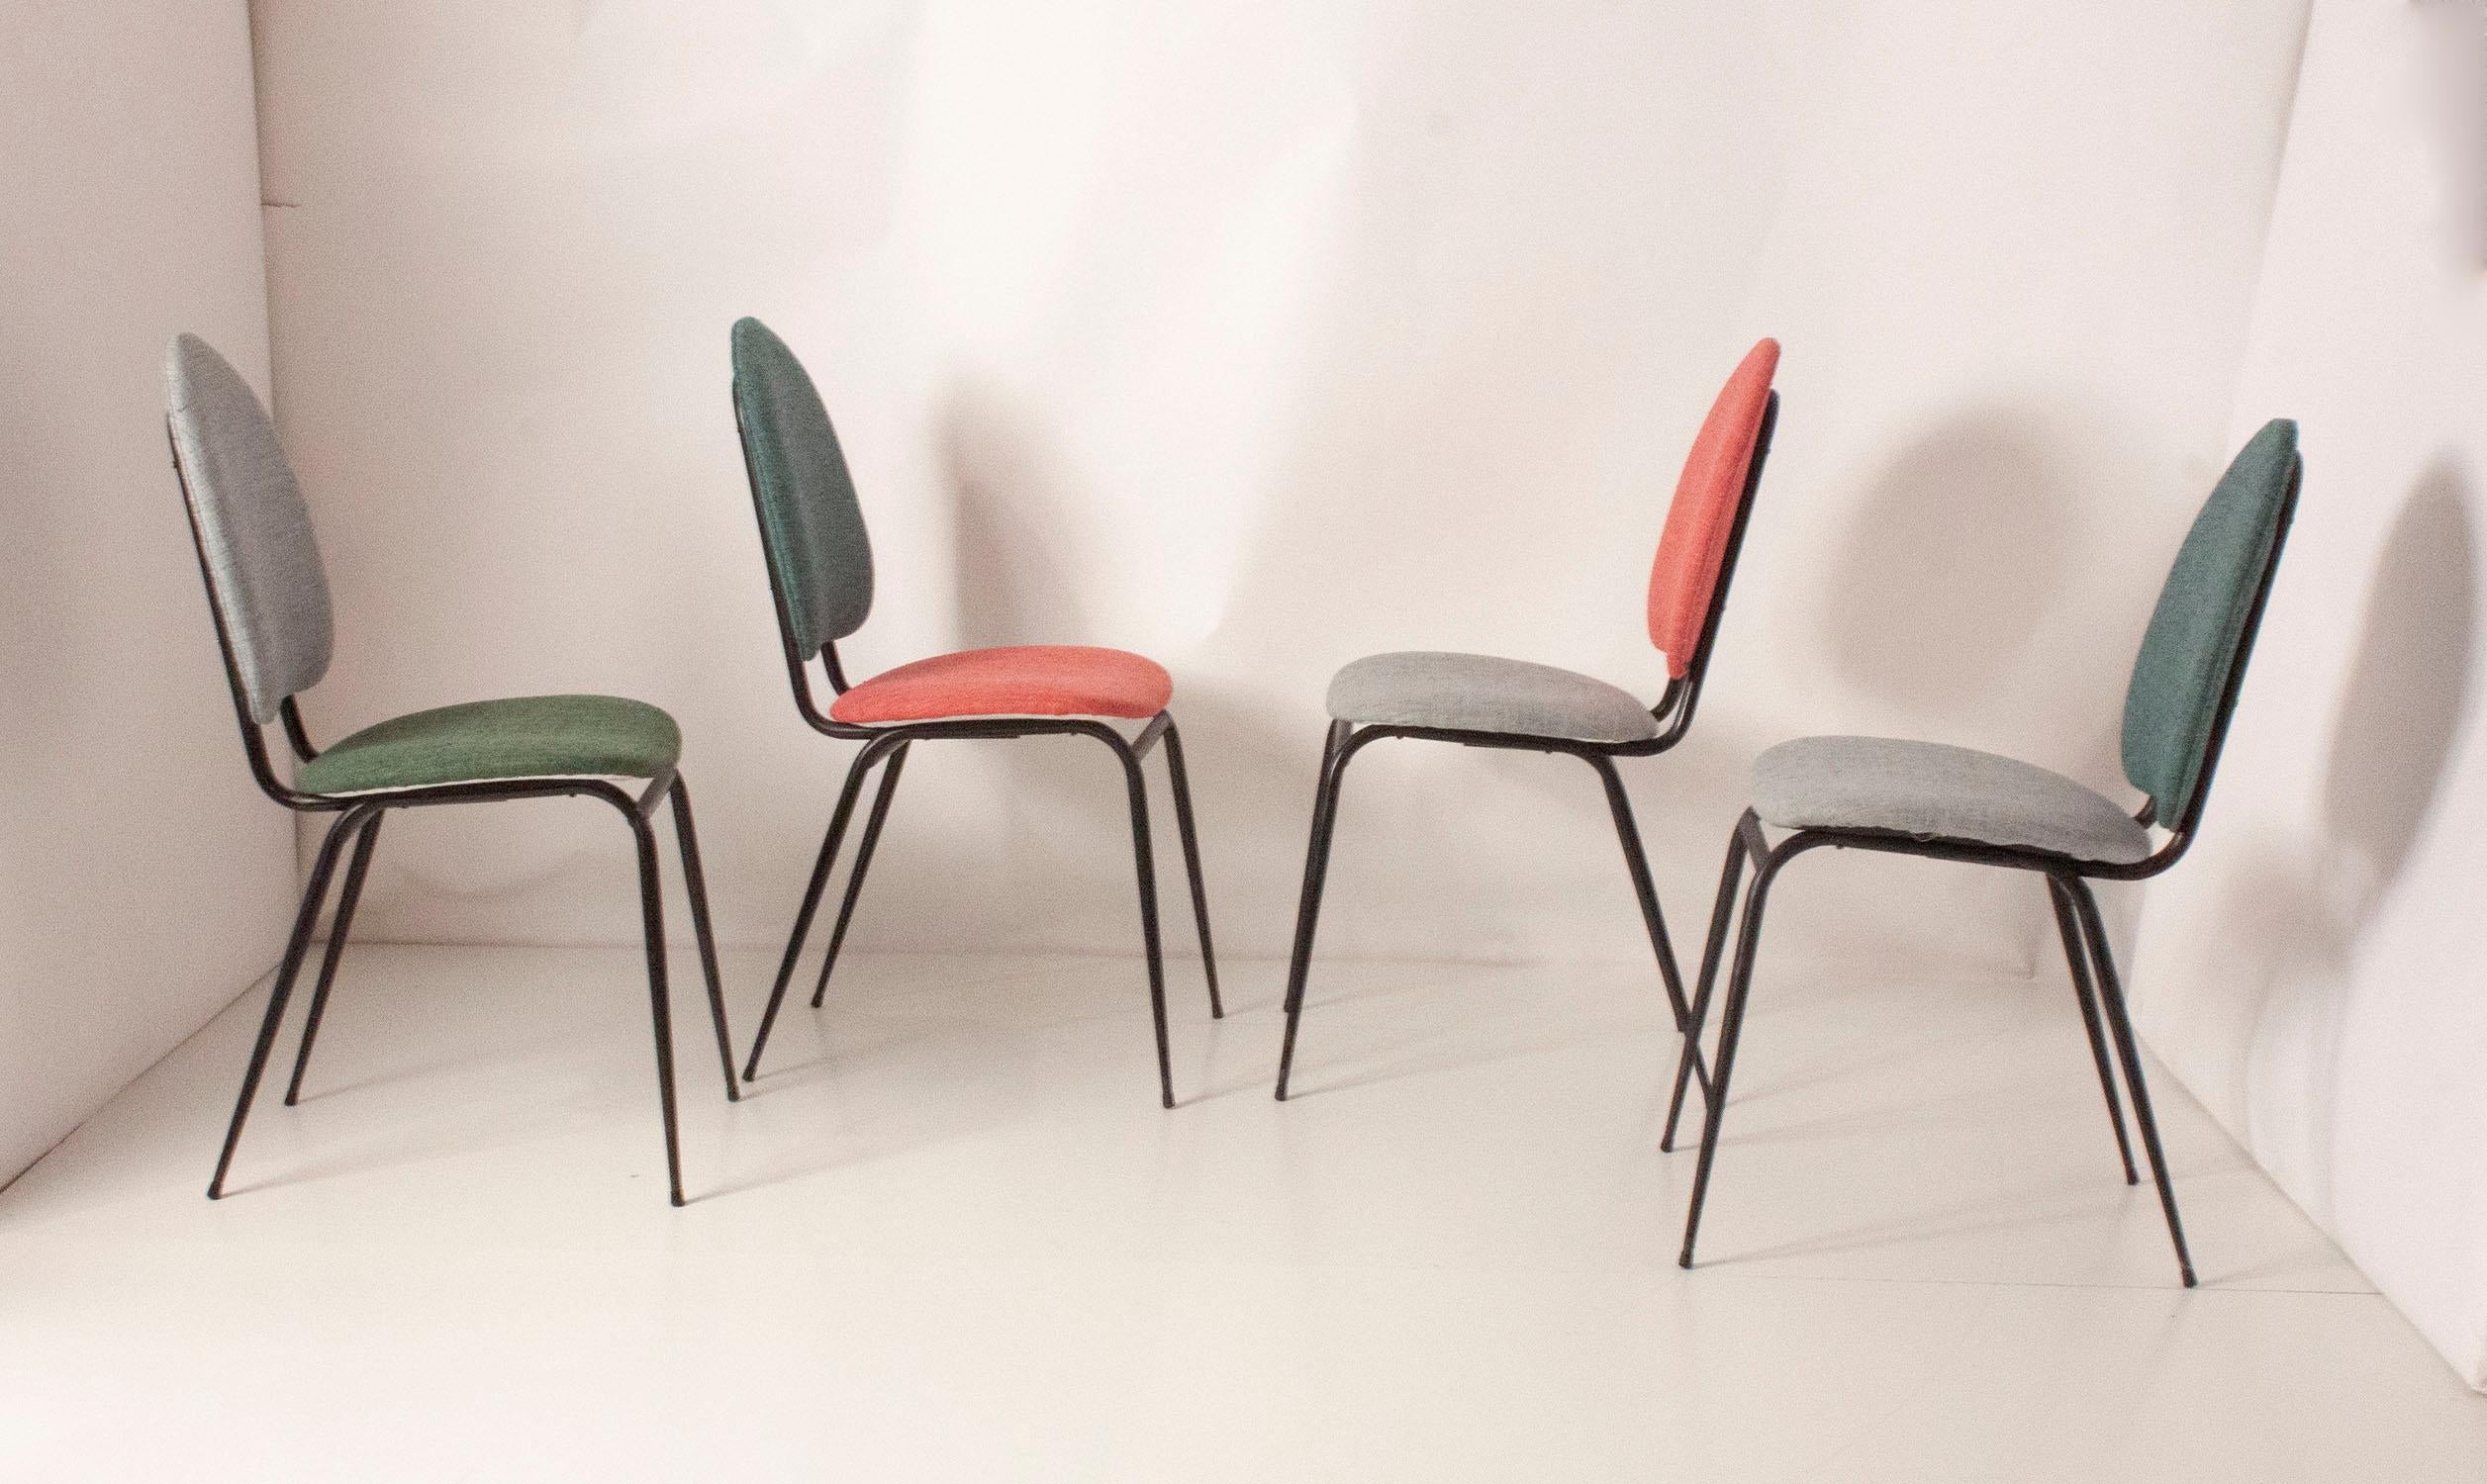 Spanish Set of Four Dining Chairs, in Various Colors, Spain, 1950s